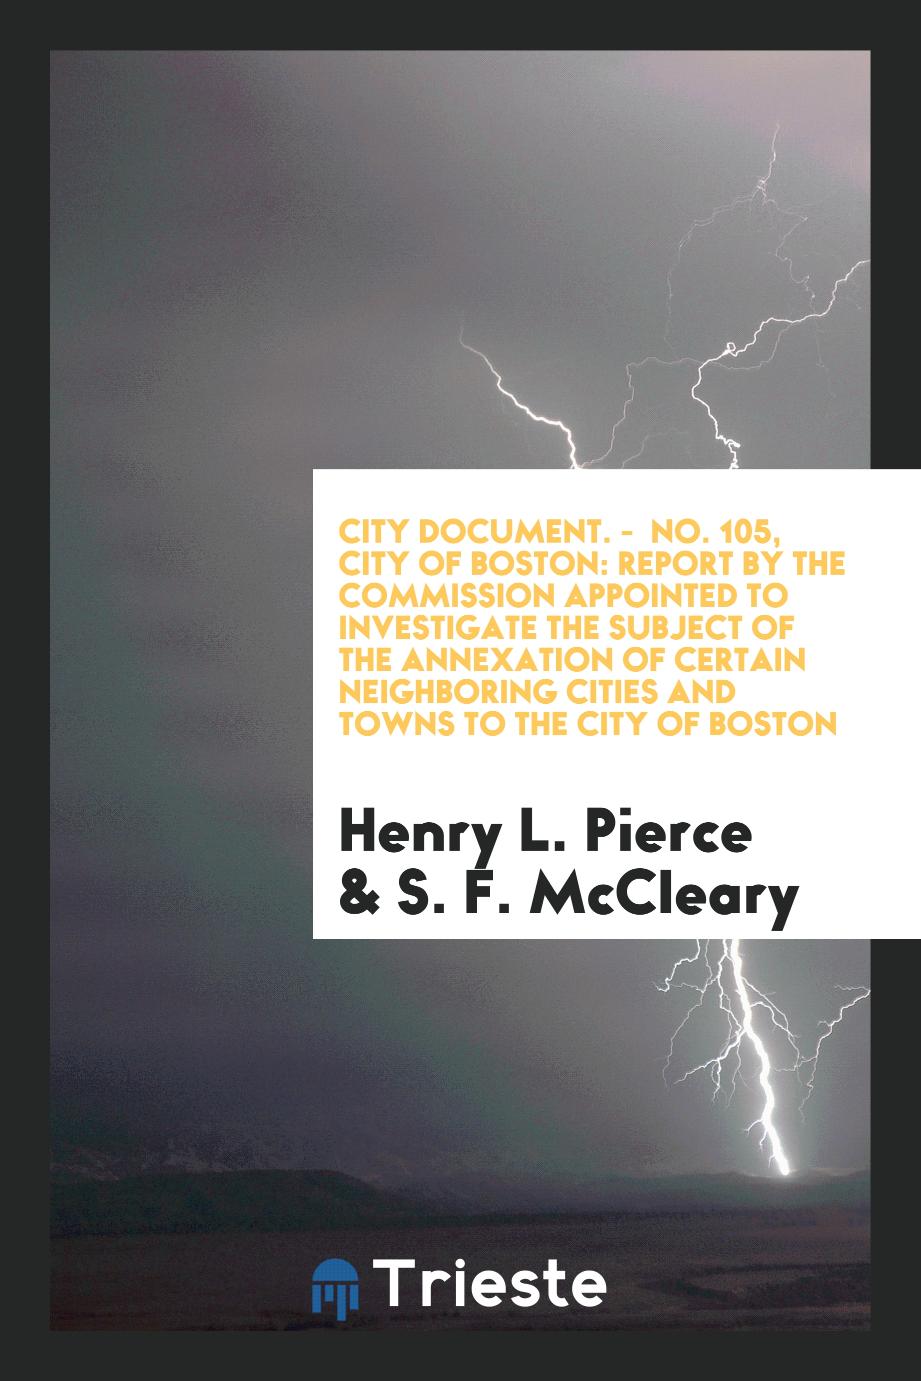 City Document. - No. 105, City of Boston: Report by the Commission Appointed to Investigate the Subject of the Annexation of Certain Neighboring Cities and Towns to the City of Boston